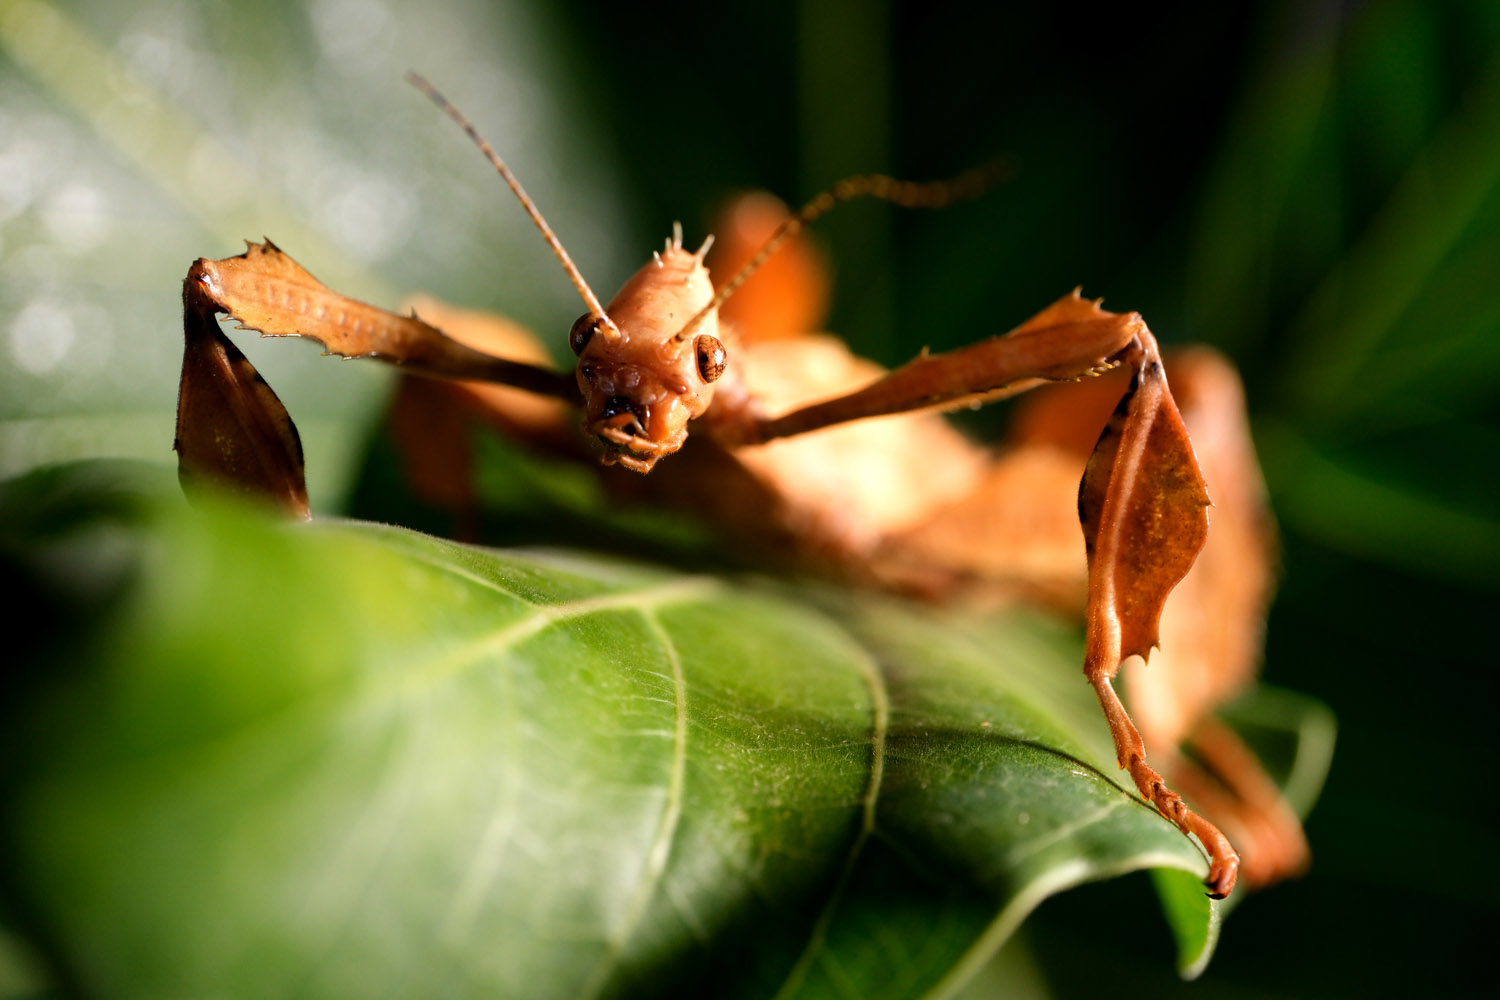 Fujifilm X-T5 camera samples stick insect face on